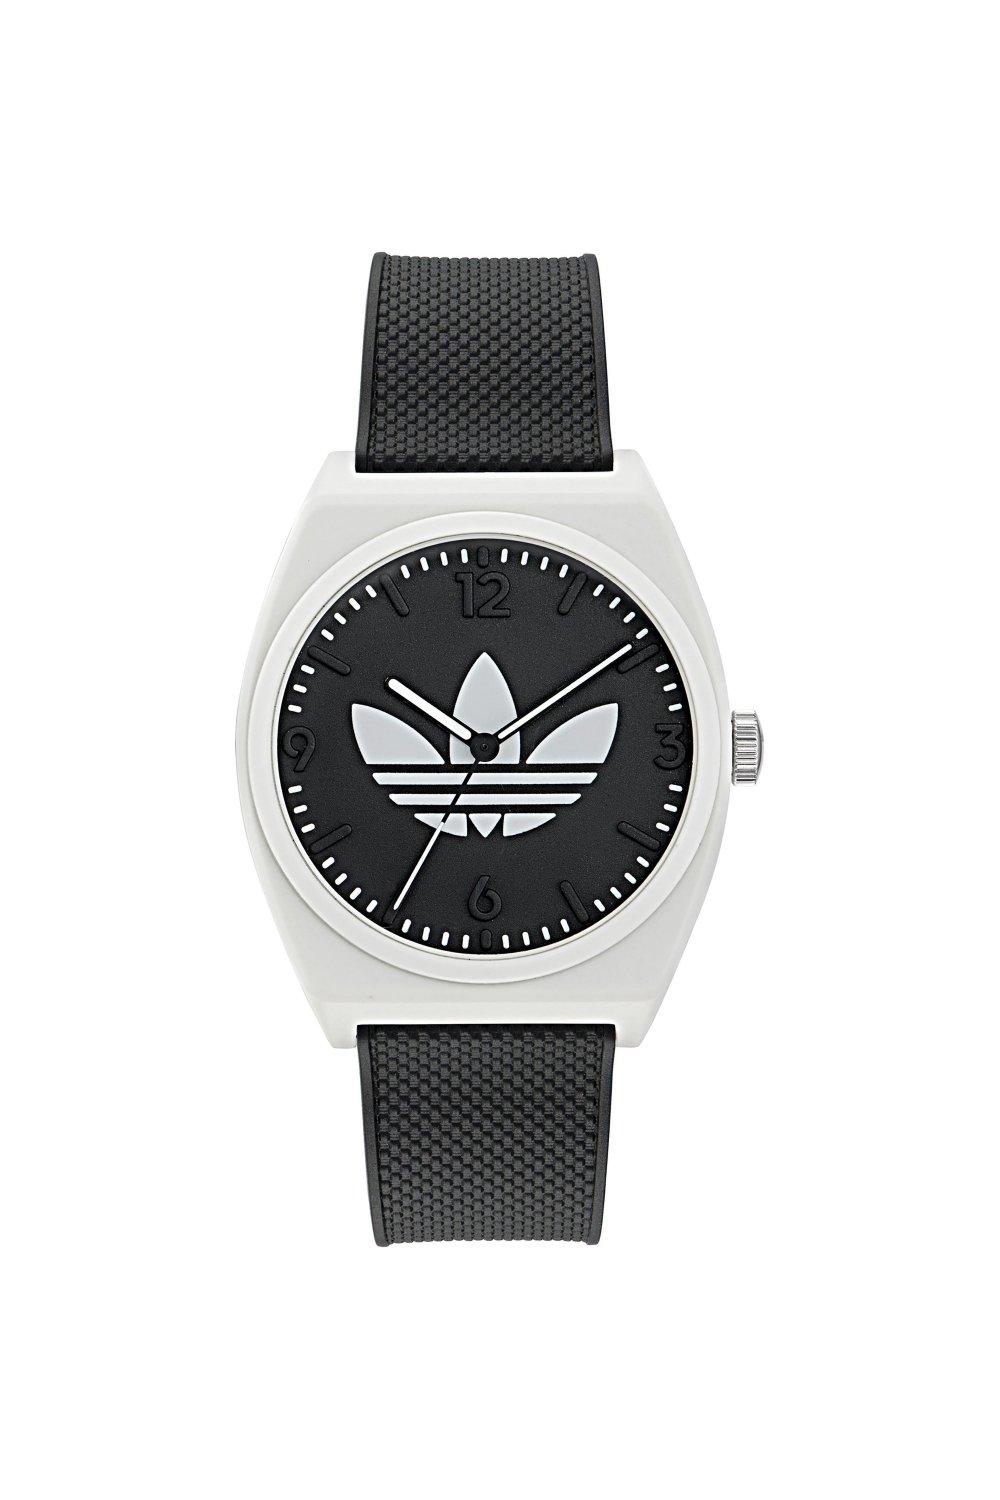 Watches | Fashion Analogue Quartz Originals Project adidas Two Aost23550 - Watch | Plastic/resin